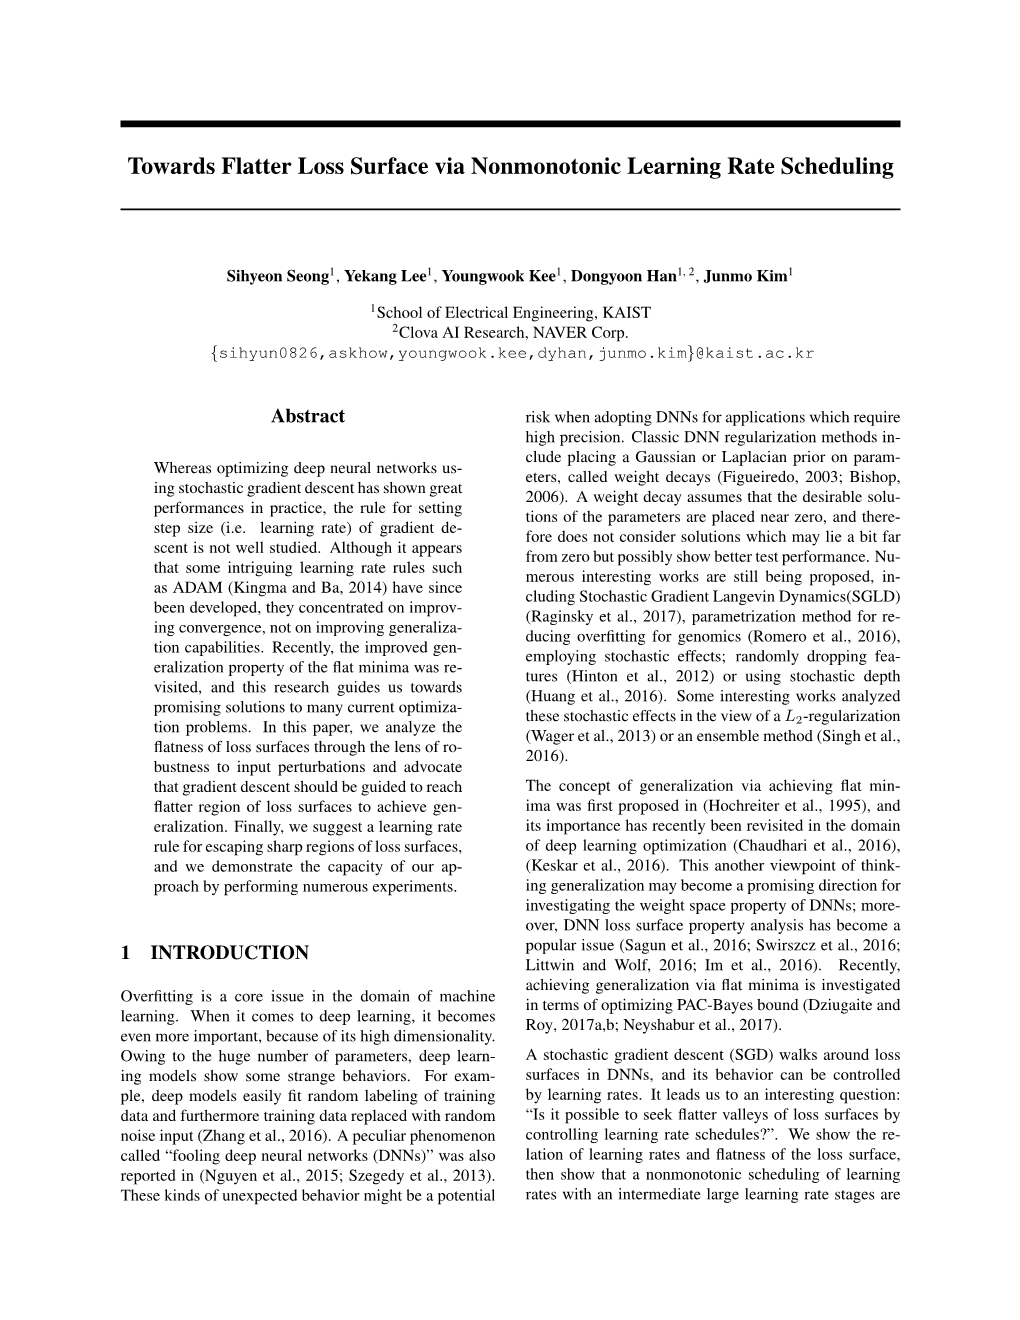 Towards Flatter Loss Surface Via Nonmonotonic Learning Rate Scheduling